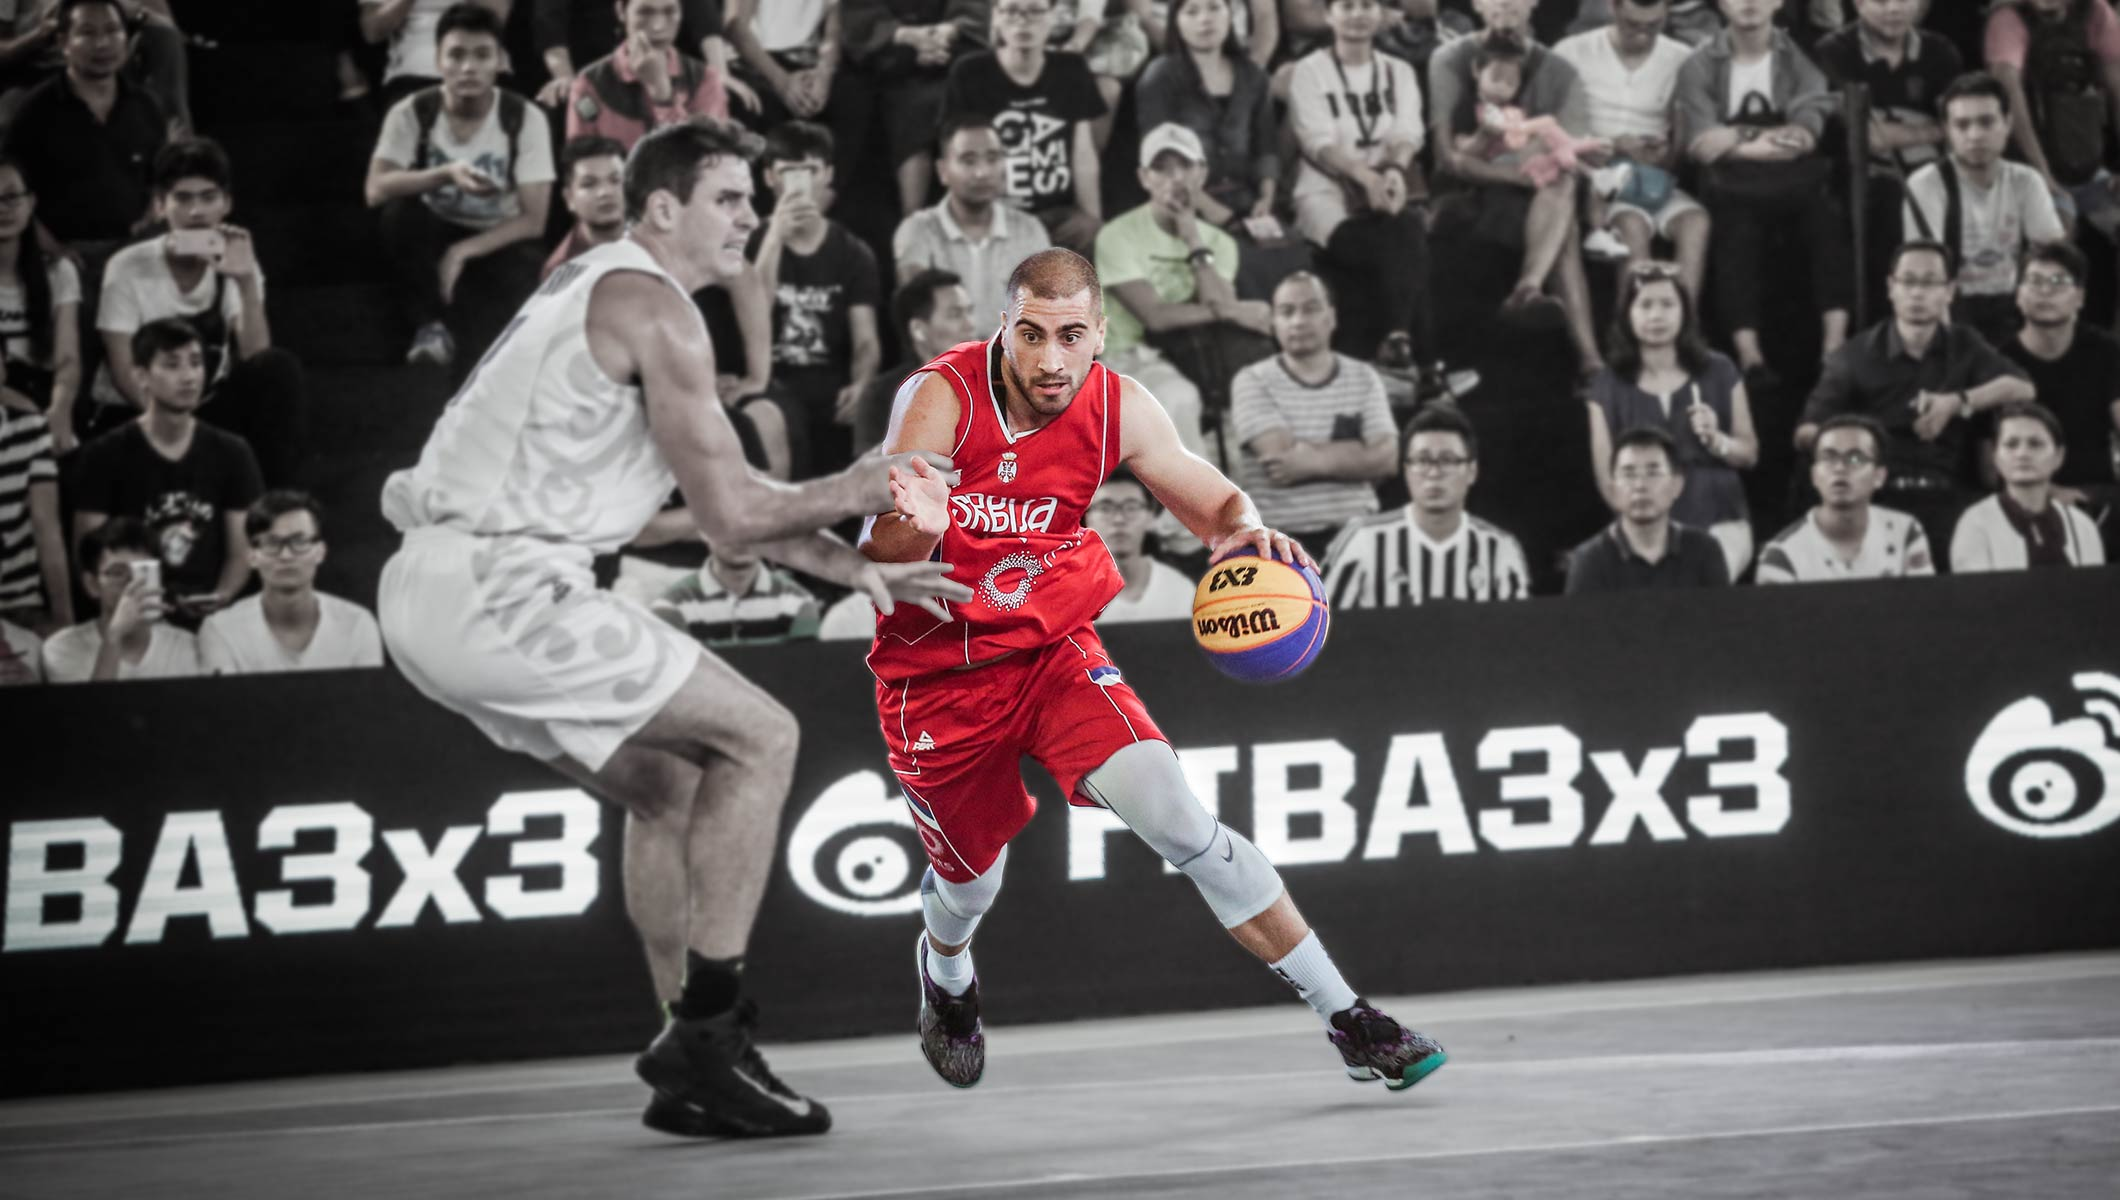 Olympic 3x3 basketball golden opportunity for New Zealand | New Zealand